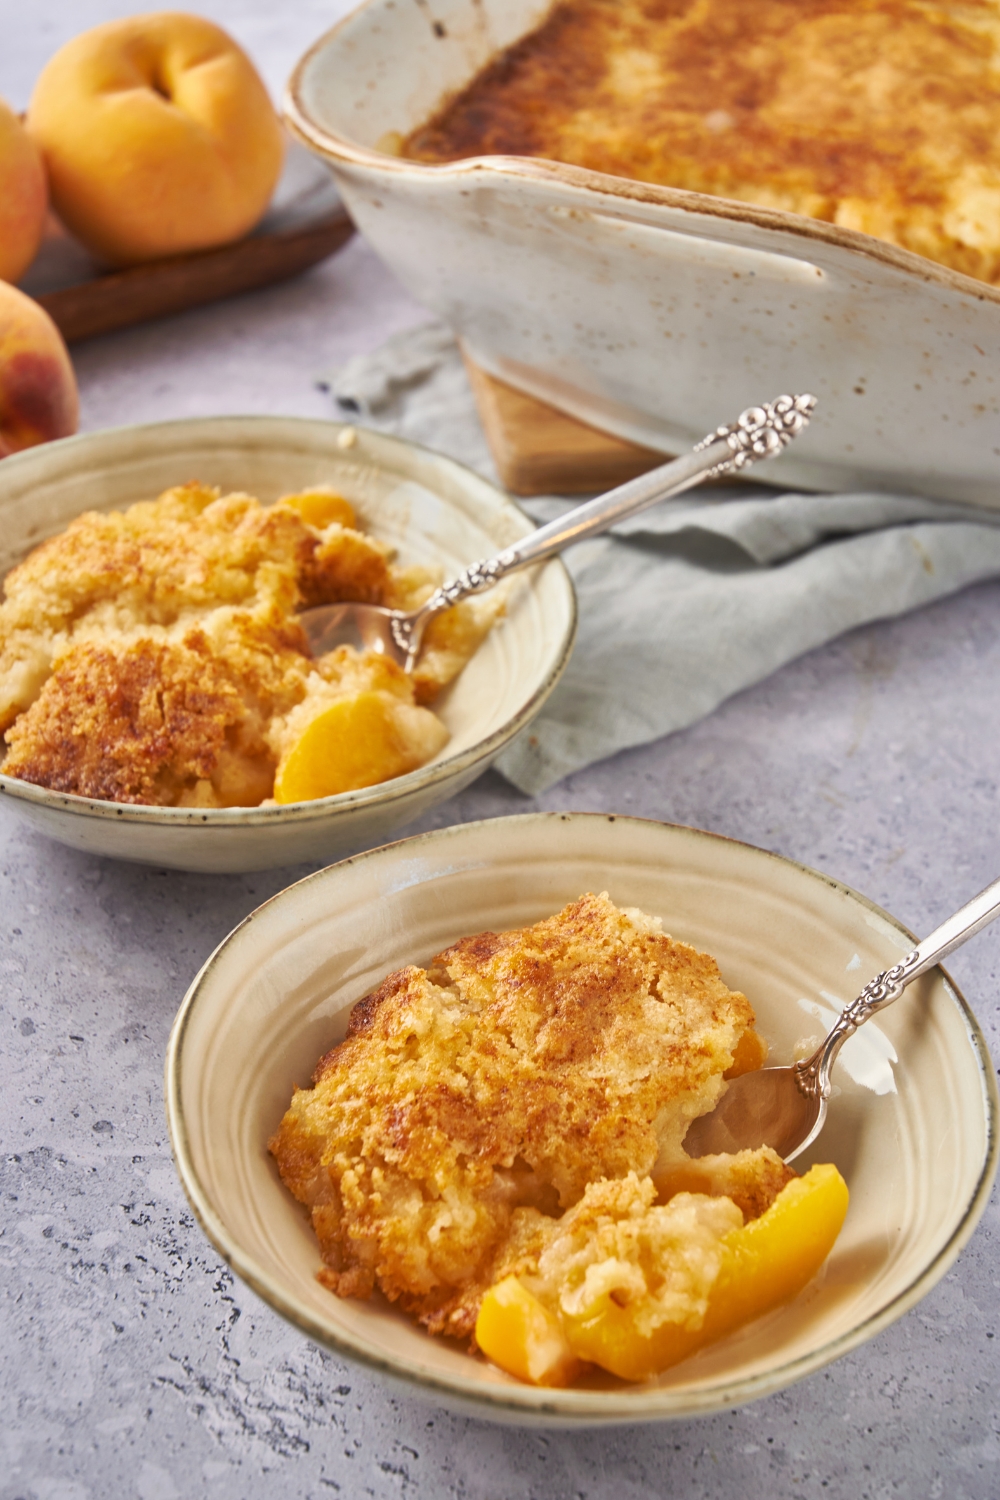 Two servings of peach cobbler with spoons in the bowls and the rest of the cobbler in the background.